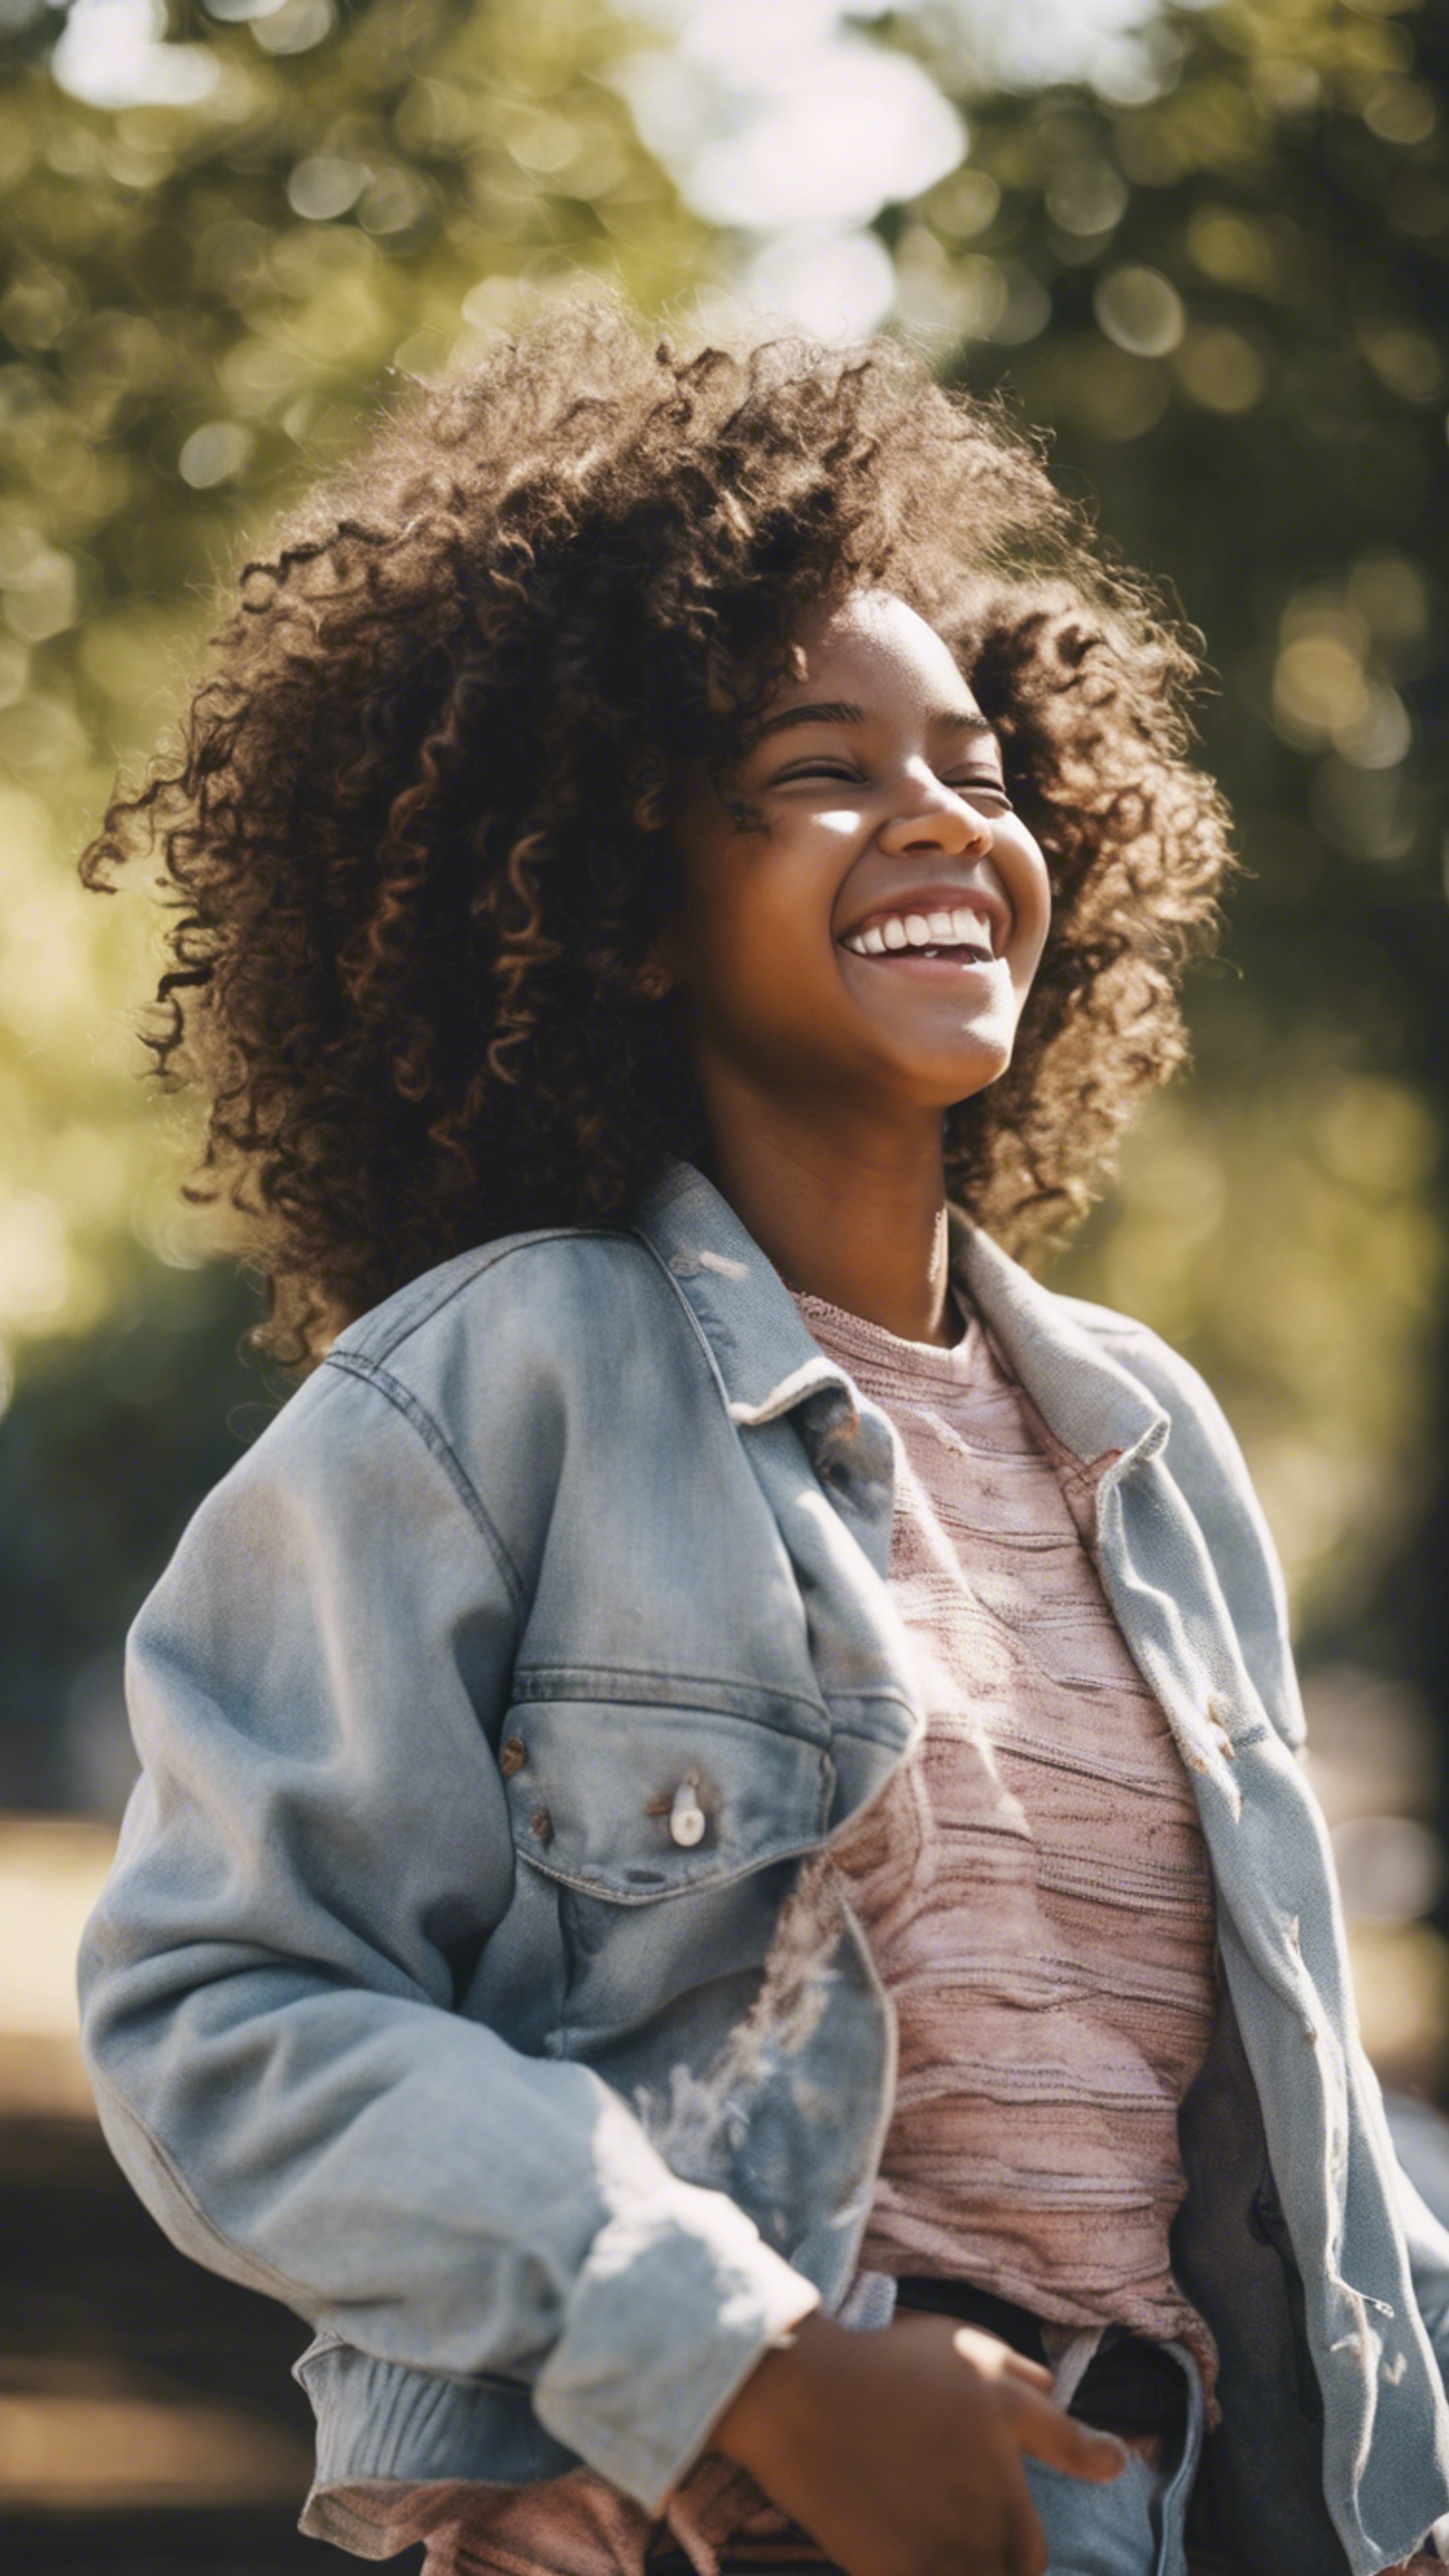 A confident young black girl with big, curly hair laughing while playing in a city park during a sunny afternoon. duvar kağıdı[a9bacc30abb04d56bfae]